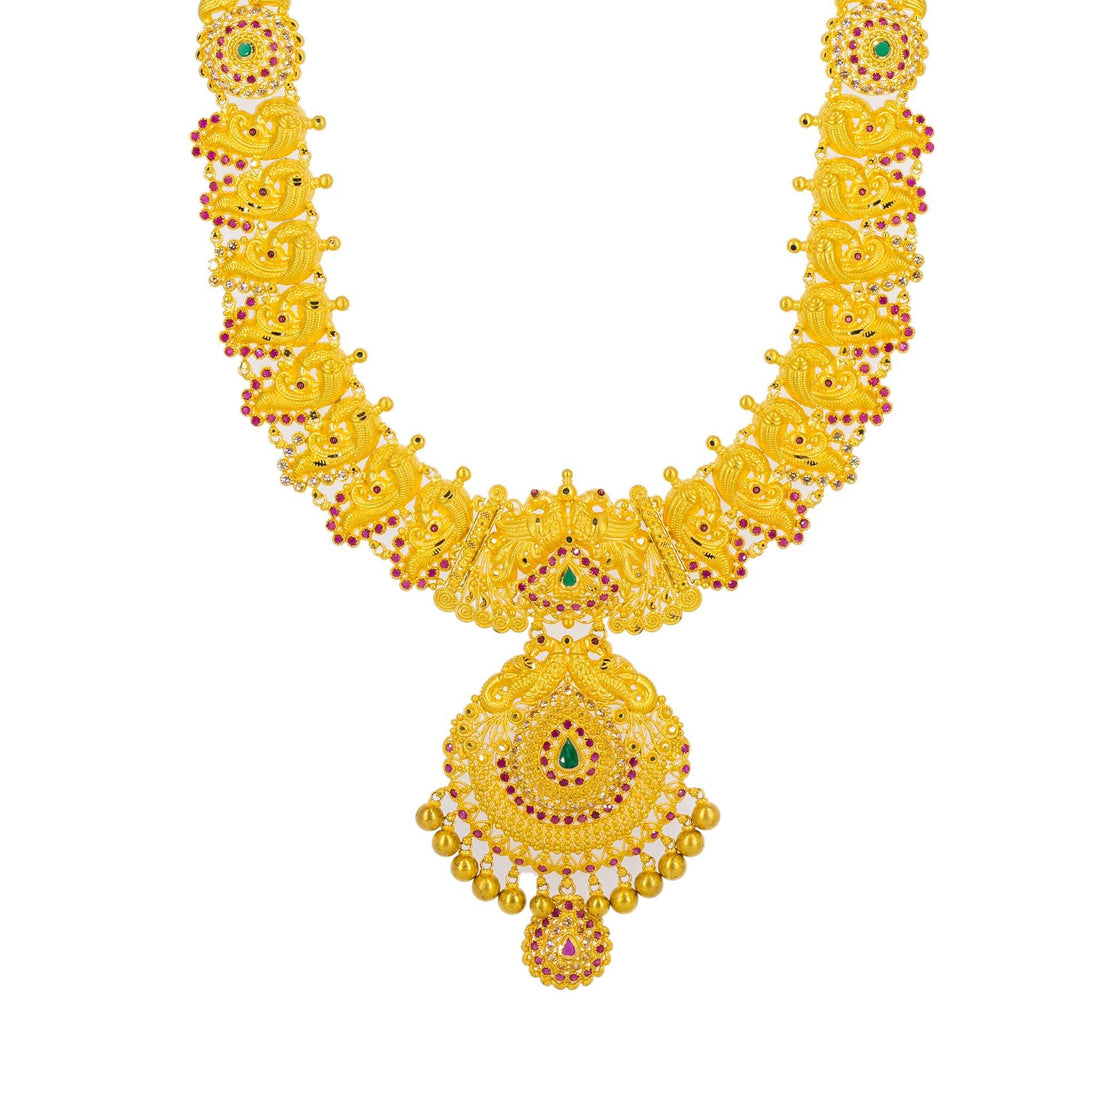 Buy Malabar Gold and Diamonds 22 kt Gold Necklace Online At Best Price @  Tata CLiQ